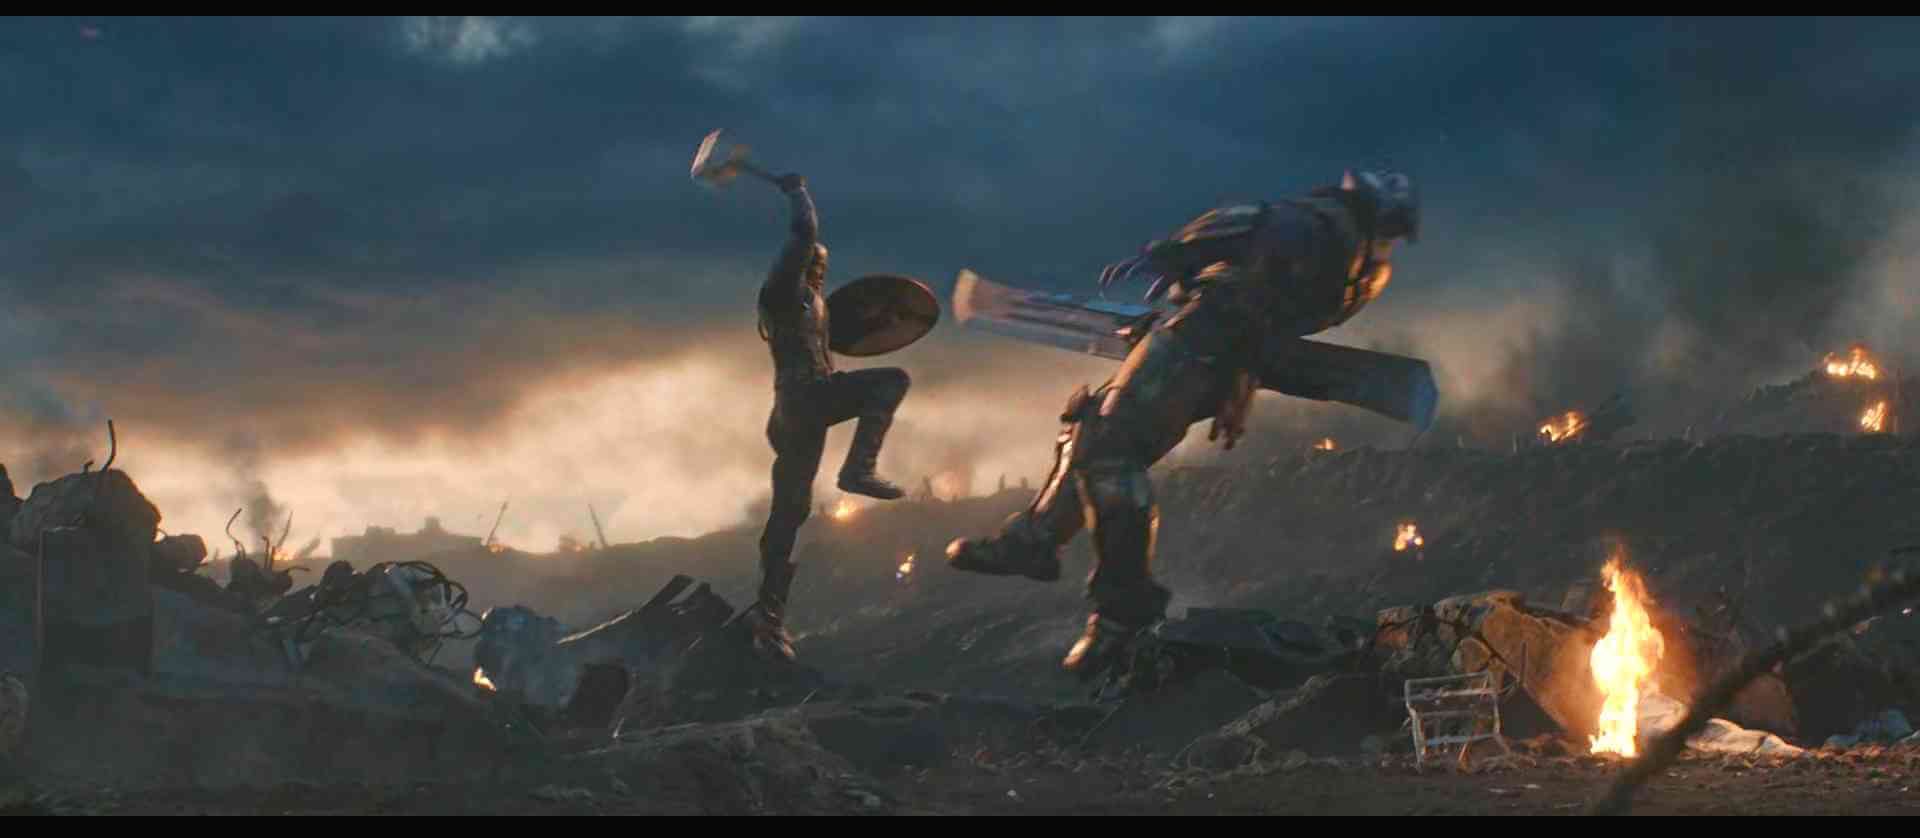 Captain-America-wields-thor-hammer-fighting-thanos-with-his-shield